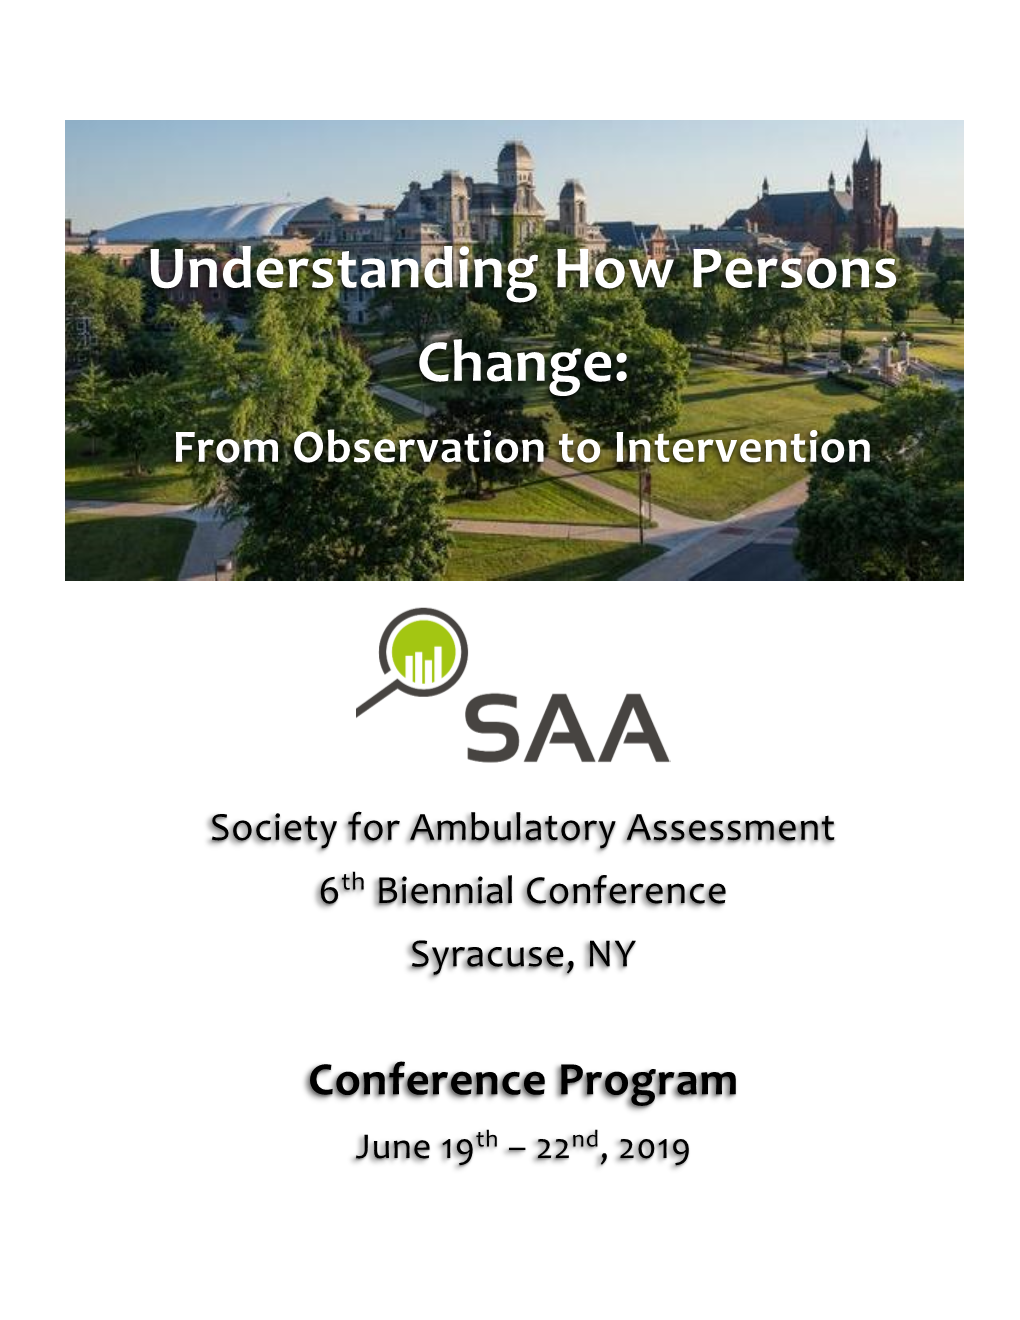 Conference Program Th Nd June 19 – 22 , 2019 Society for Ambulatory Assessment 2019 Conference Program